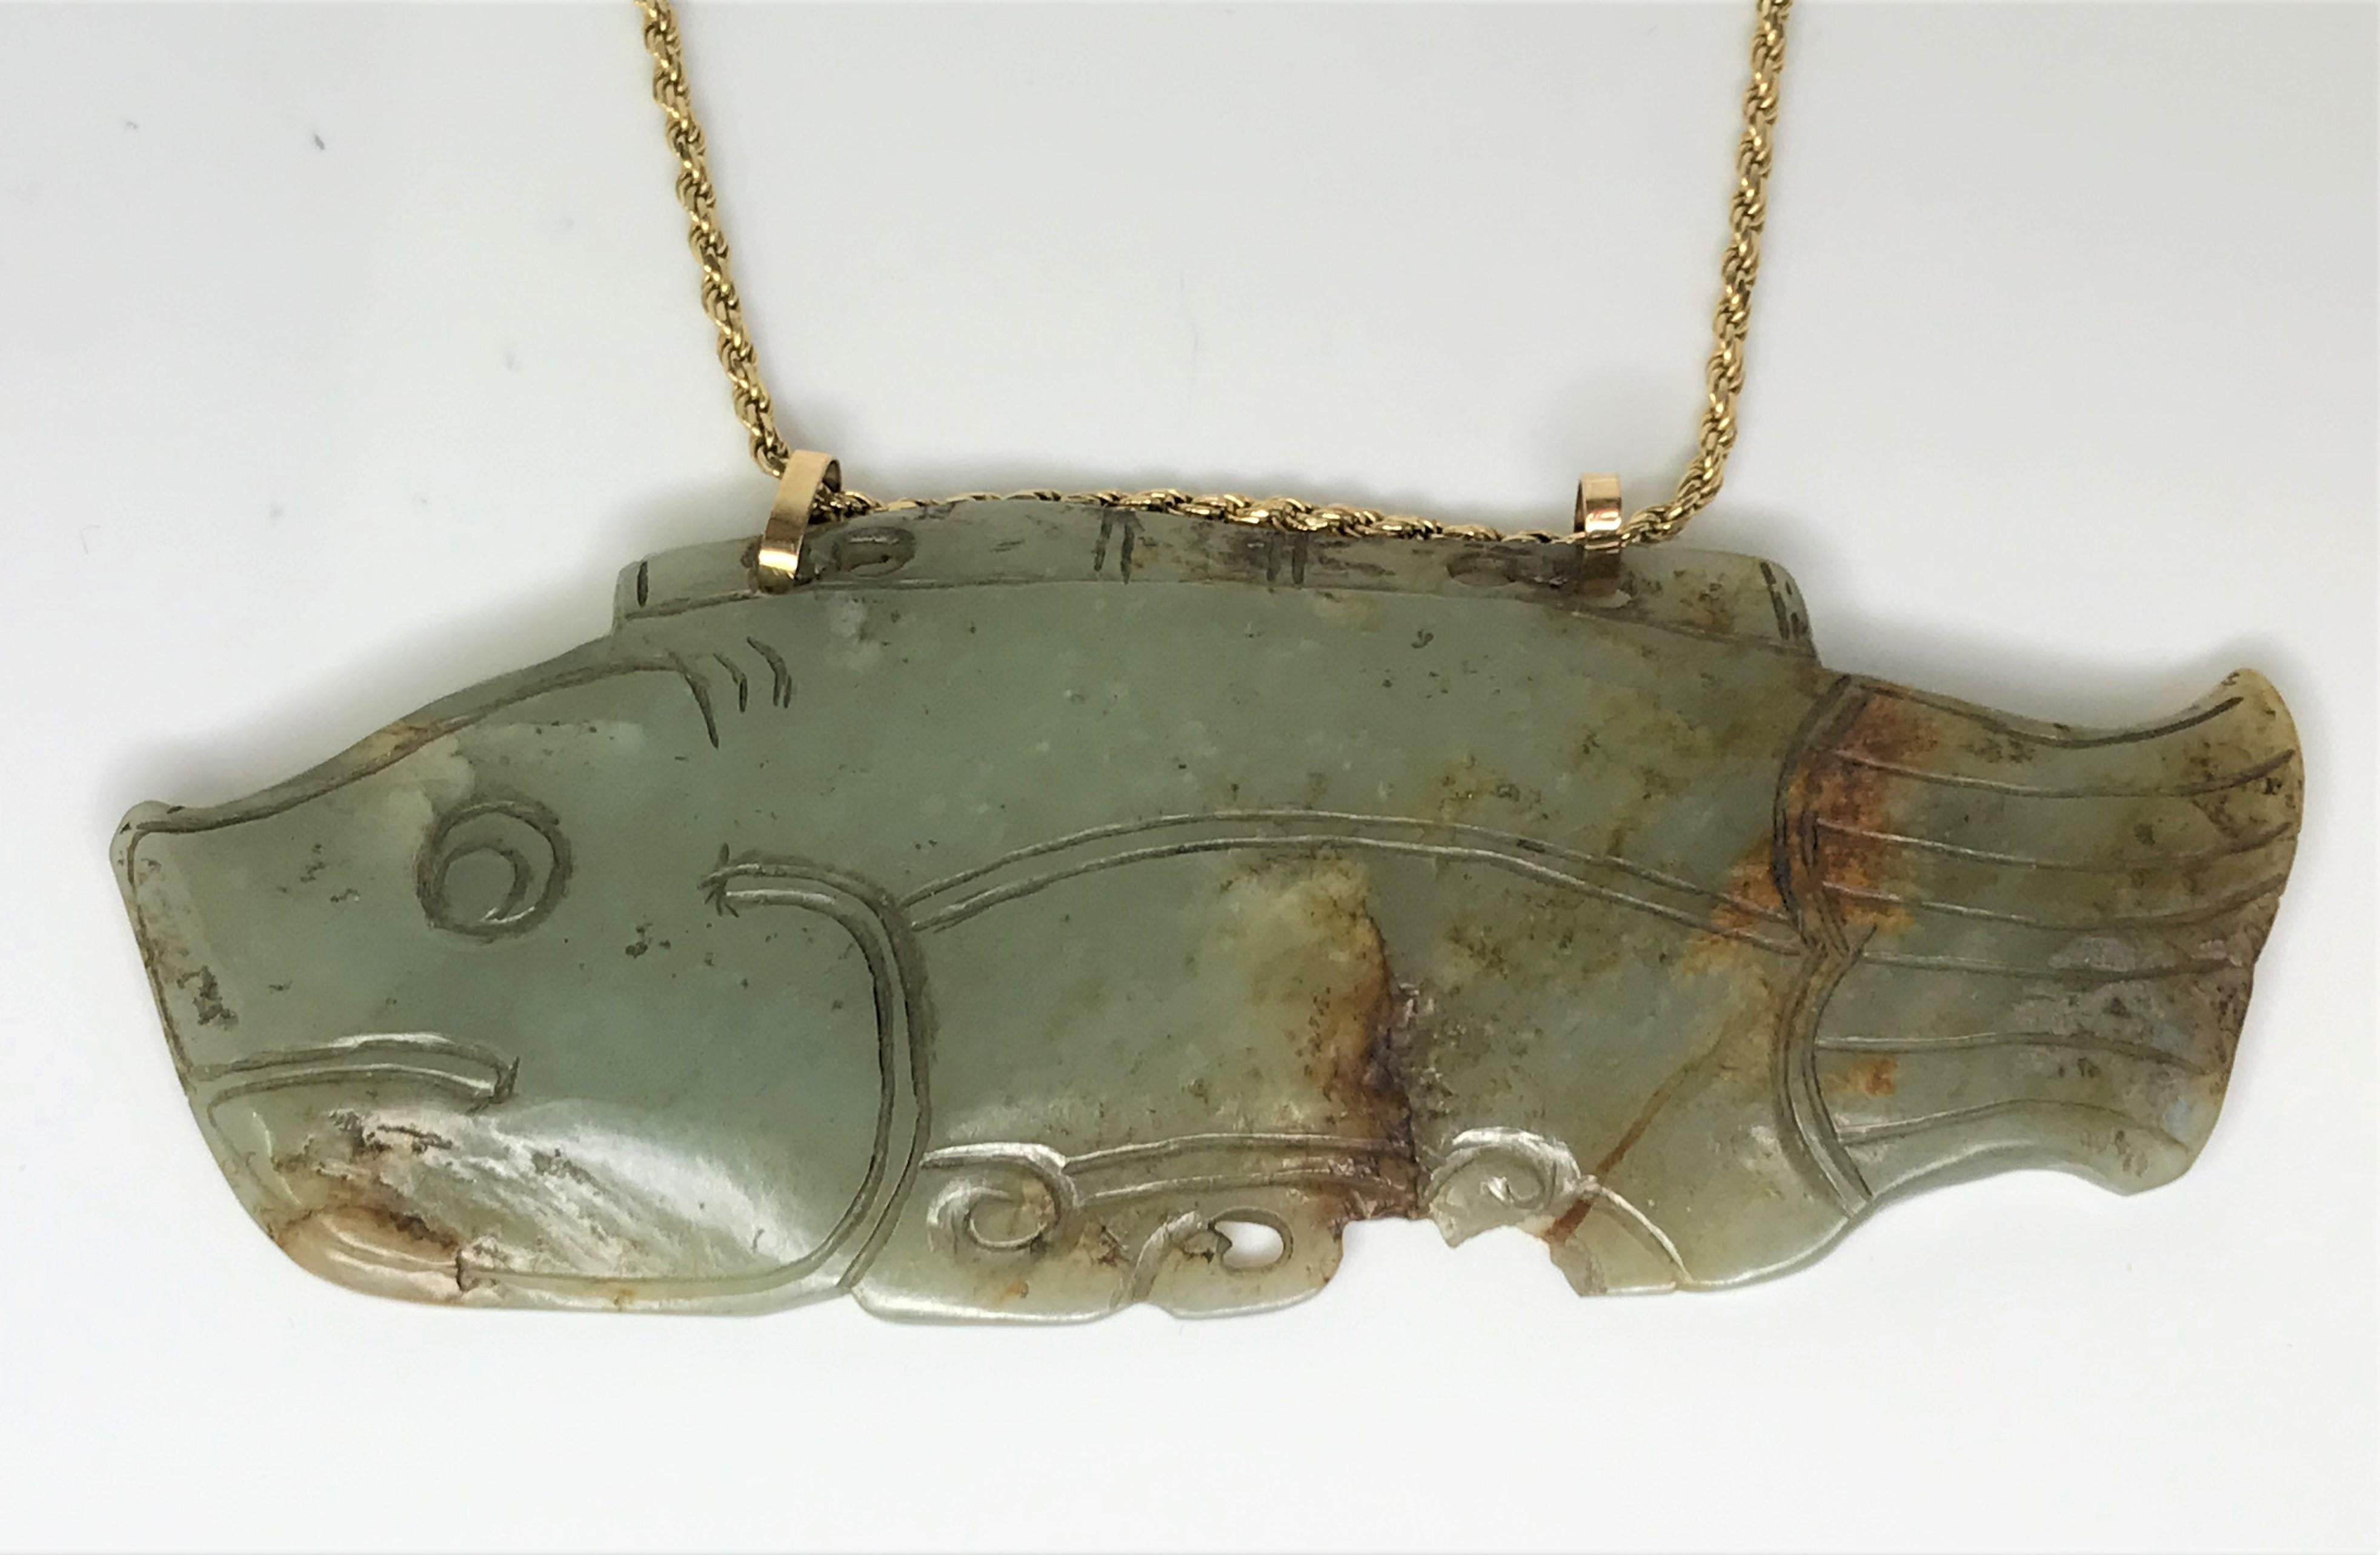 This one-of-a-kind pendant is sure to get attention.
Jade fish pendant - approximately 5.125 inches long x 2 inches high and 1/4 inch thick
A jade fish symbolizes wealth and abundance
Two gold bales at top of fish
14 karat yellow gold rope chain,